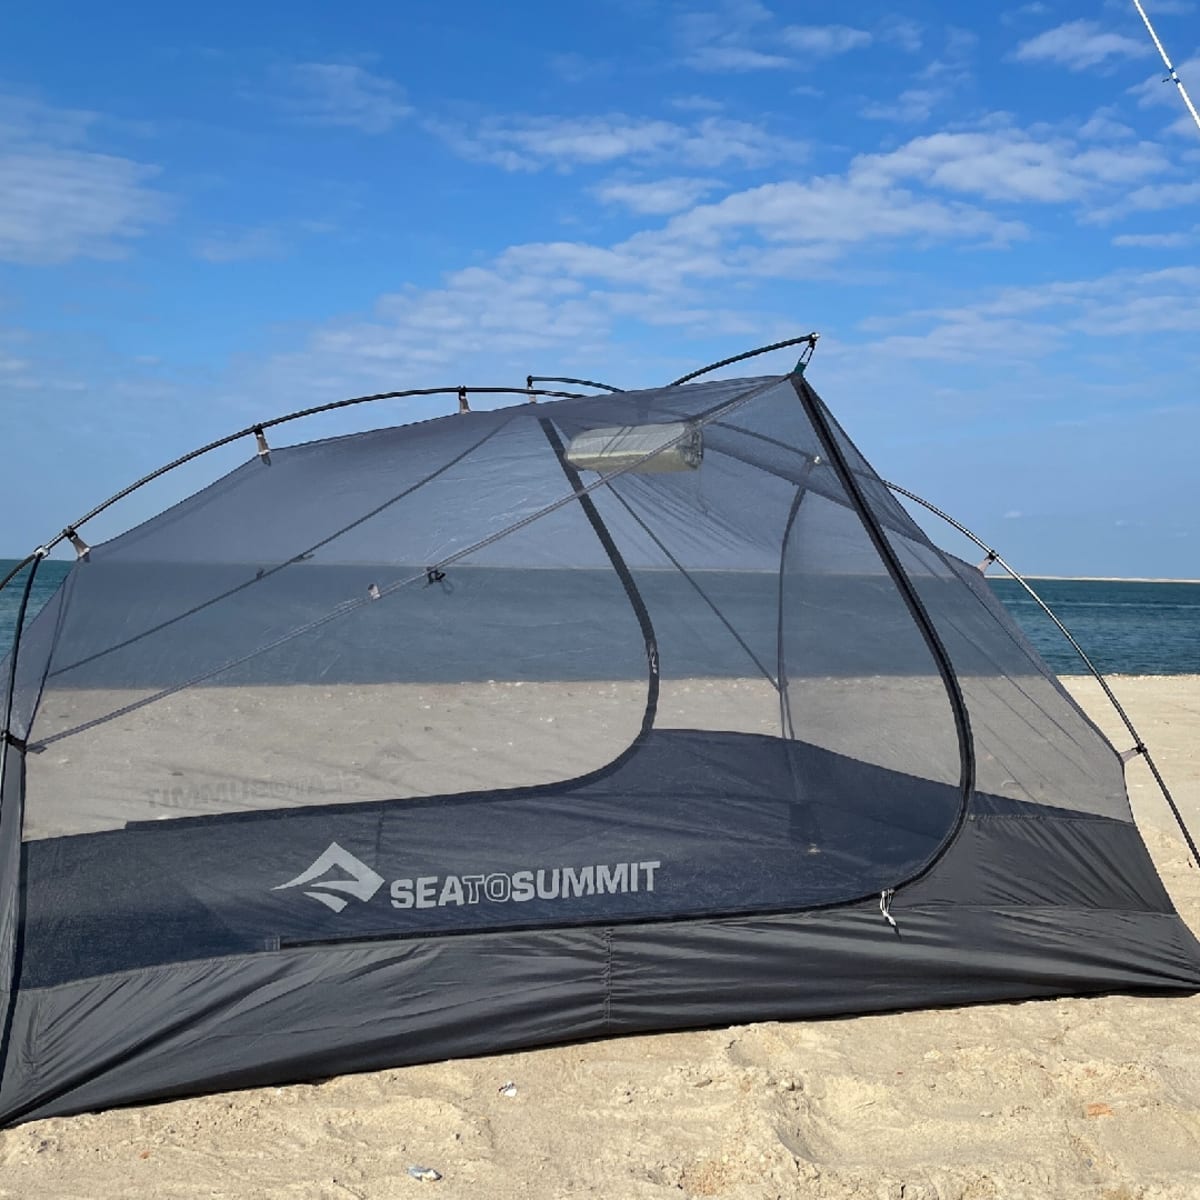 Sea To Summit Telos TR2 Tent Reviewed